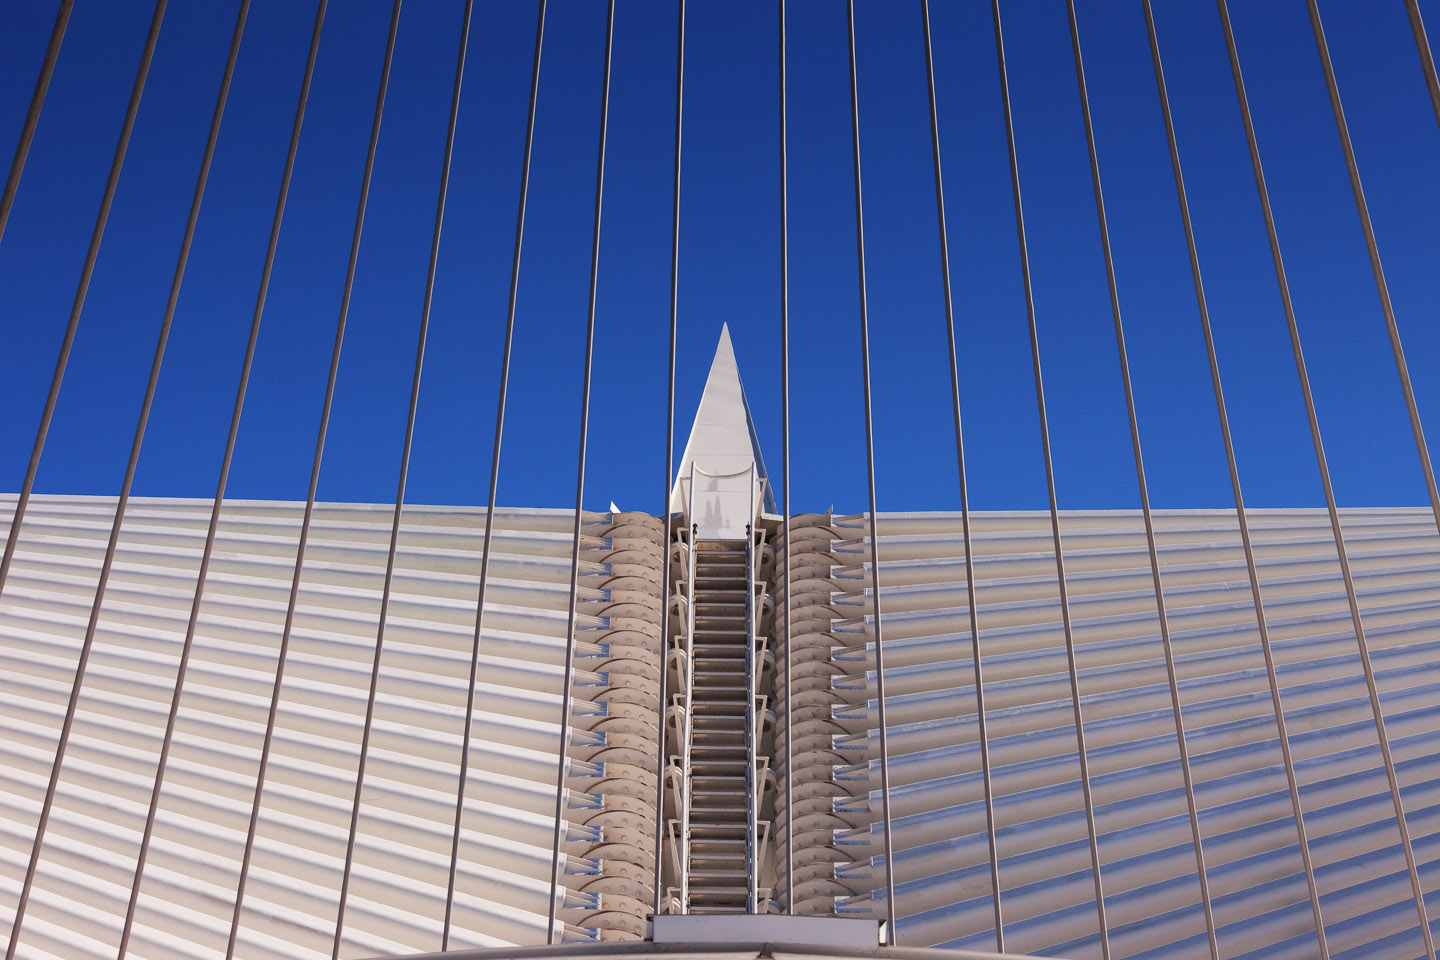 exterior mechanical fins shade the main gallery space at the Milwaukee Art Museum, designed by Santiago Calatrava, photographed by Jacob Rosenfeld